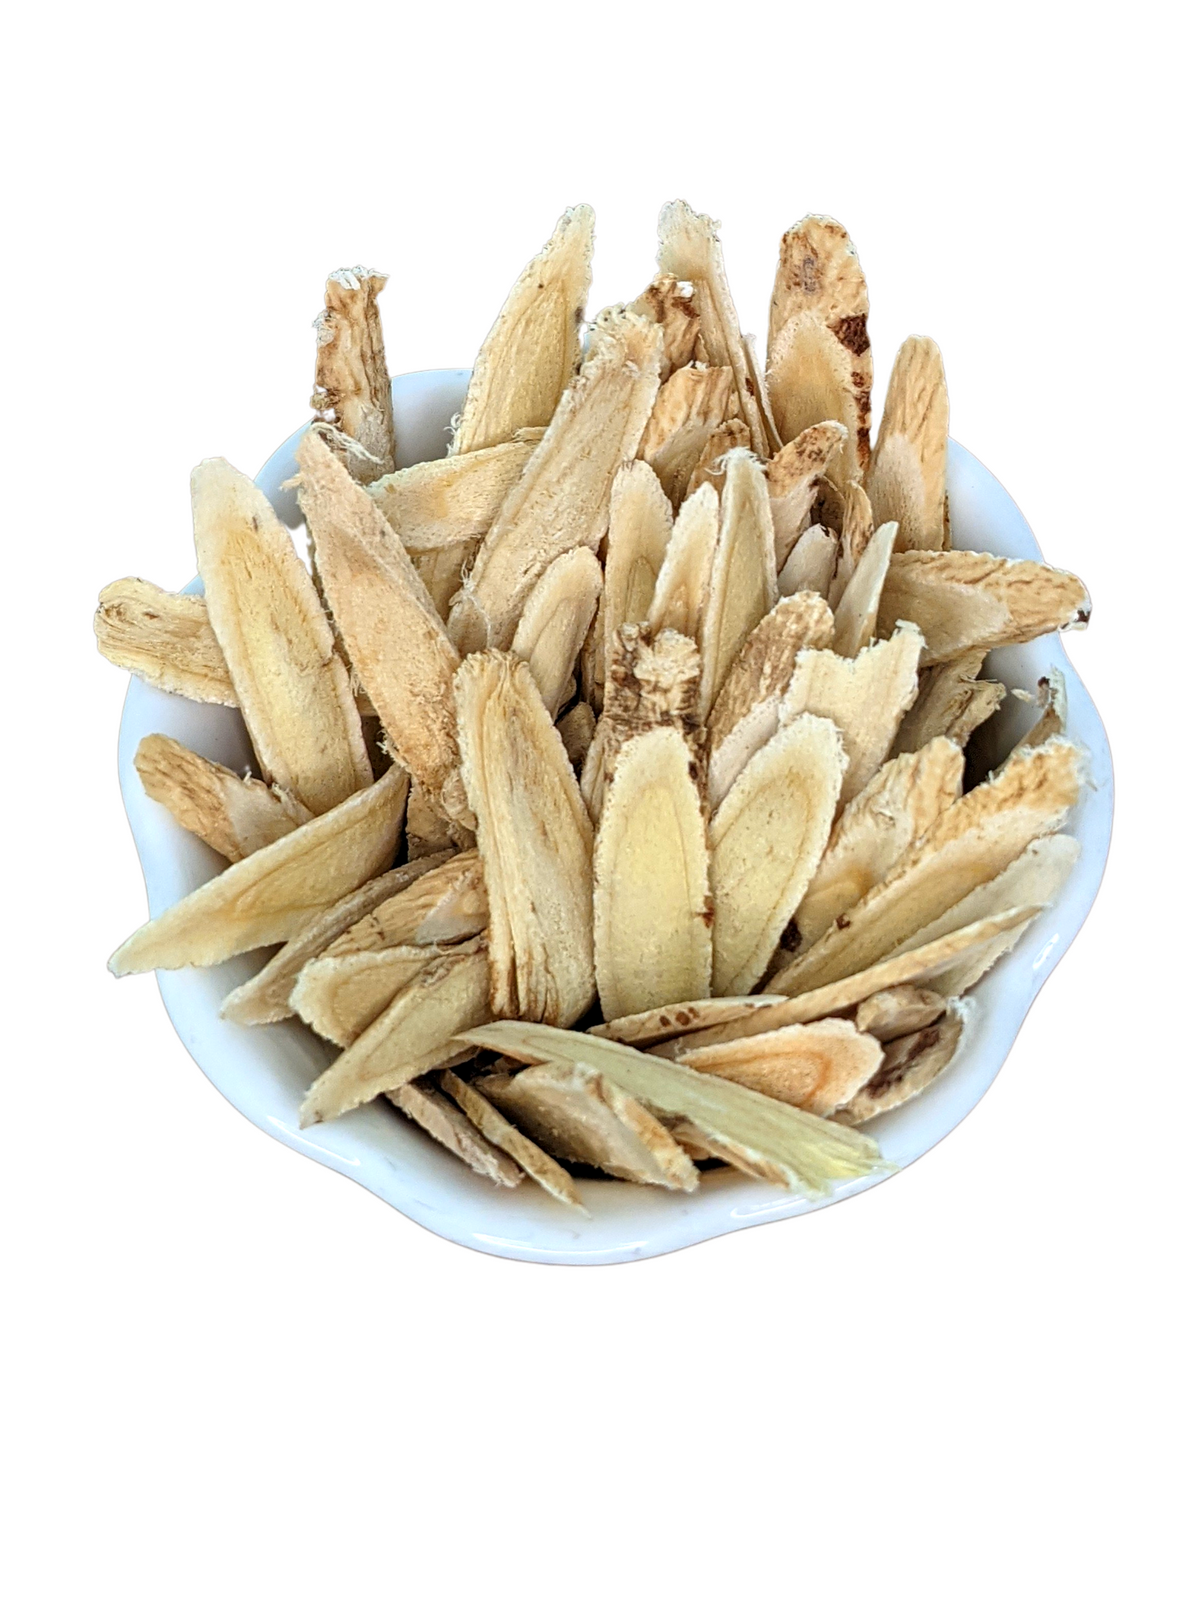 Astragalus Root Slices